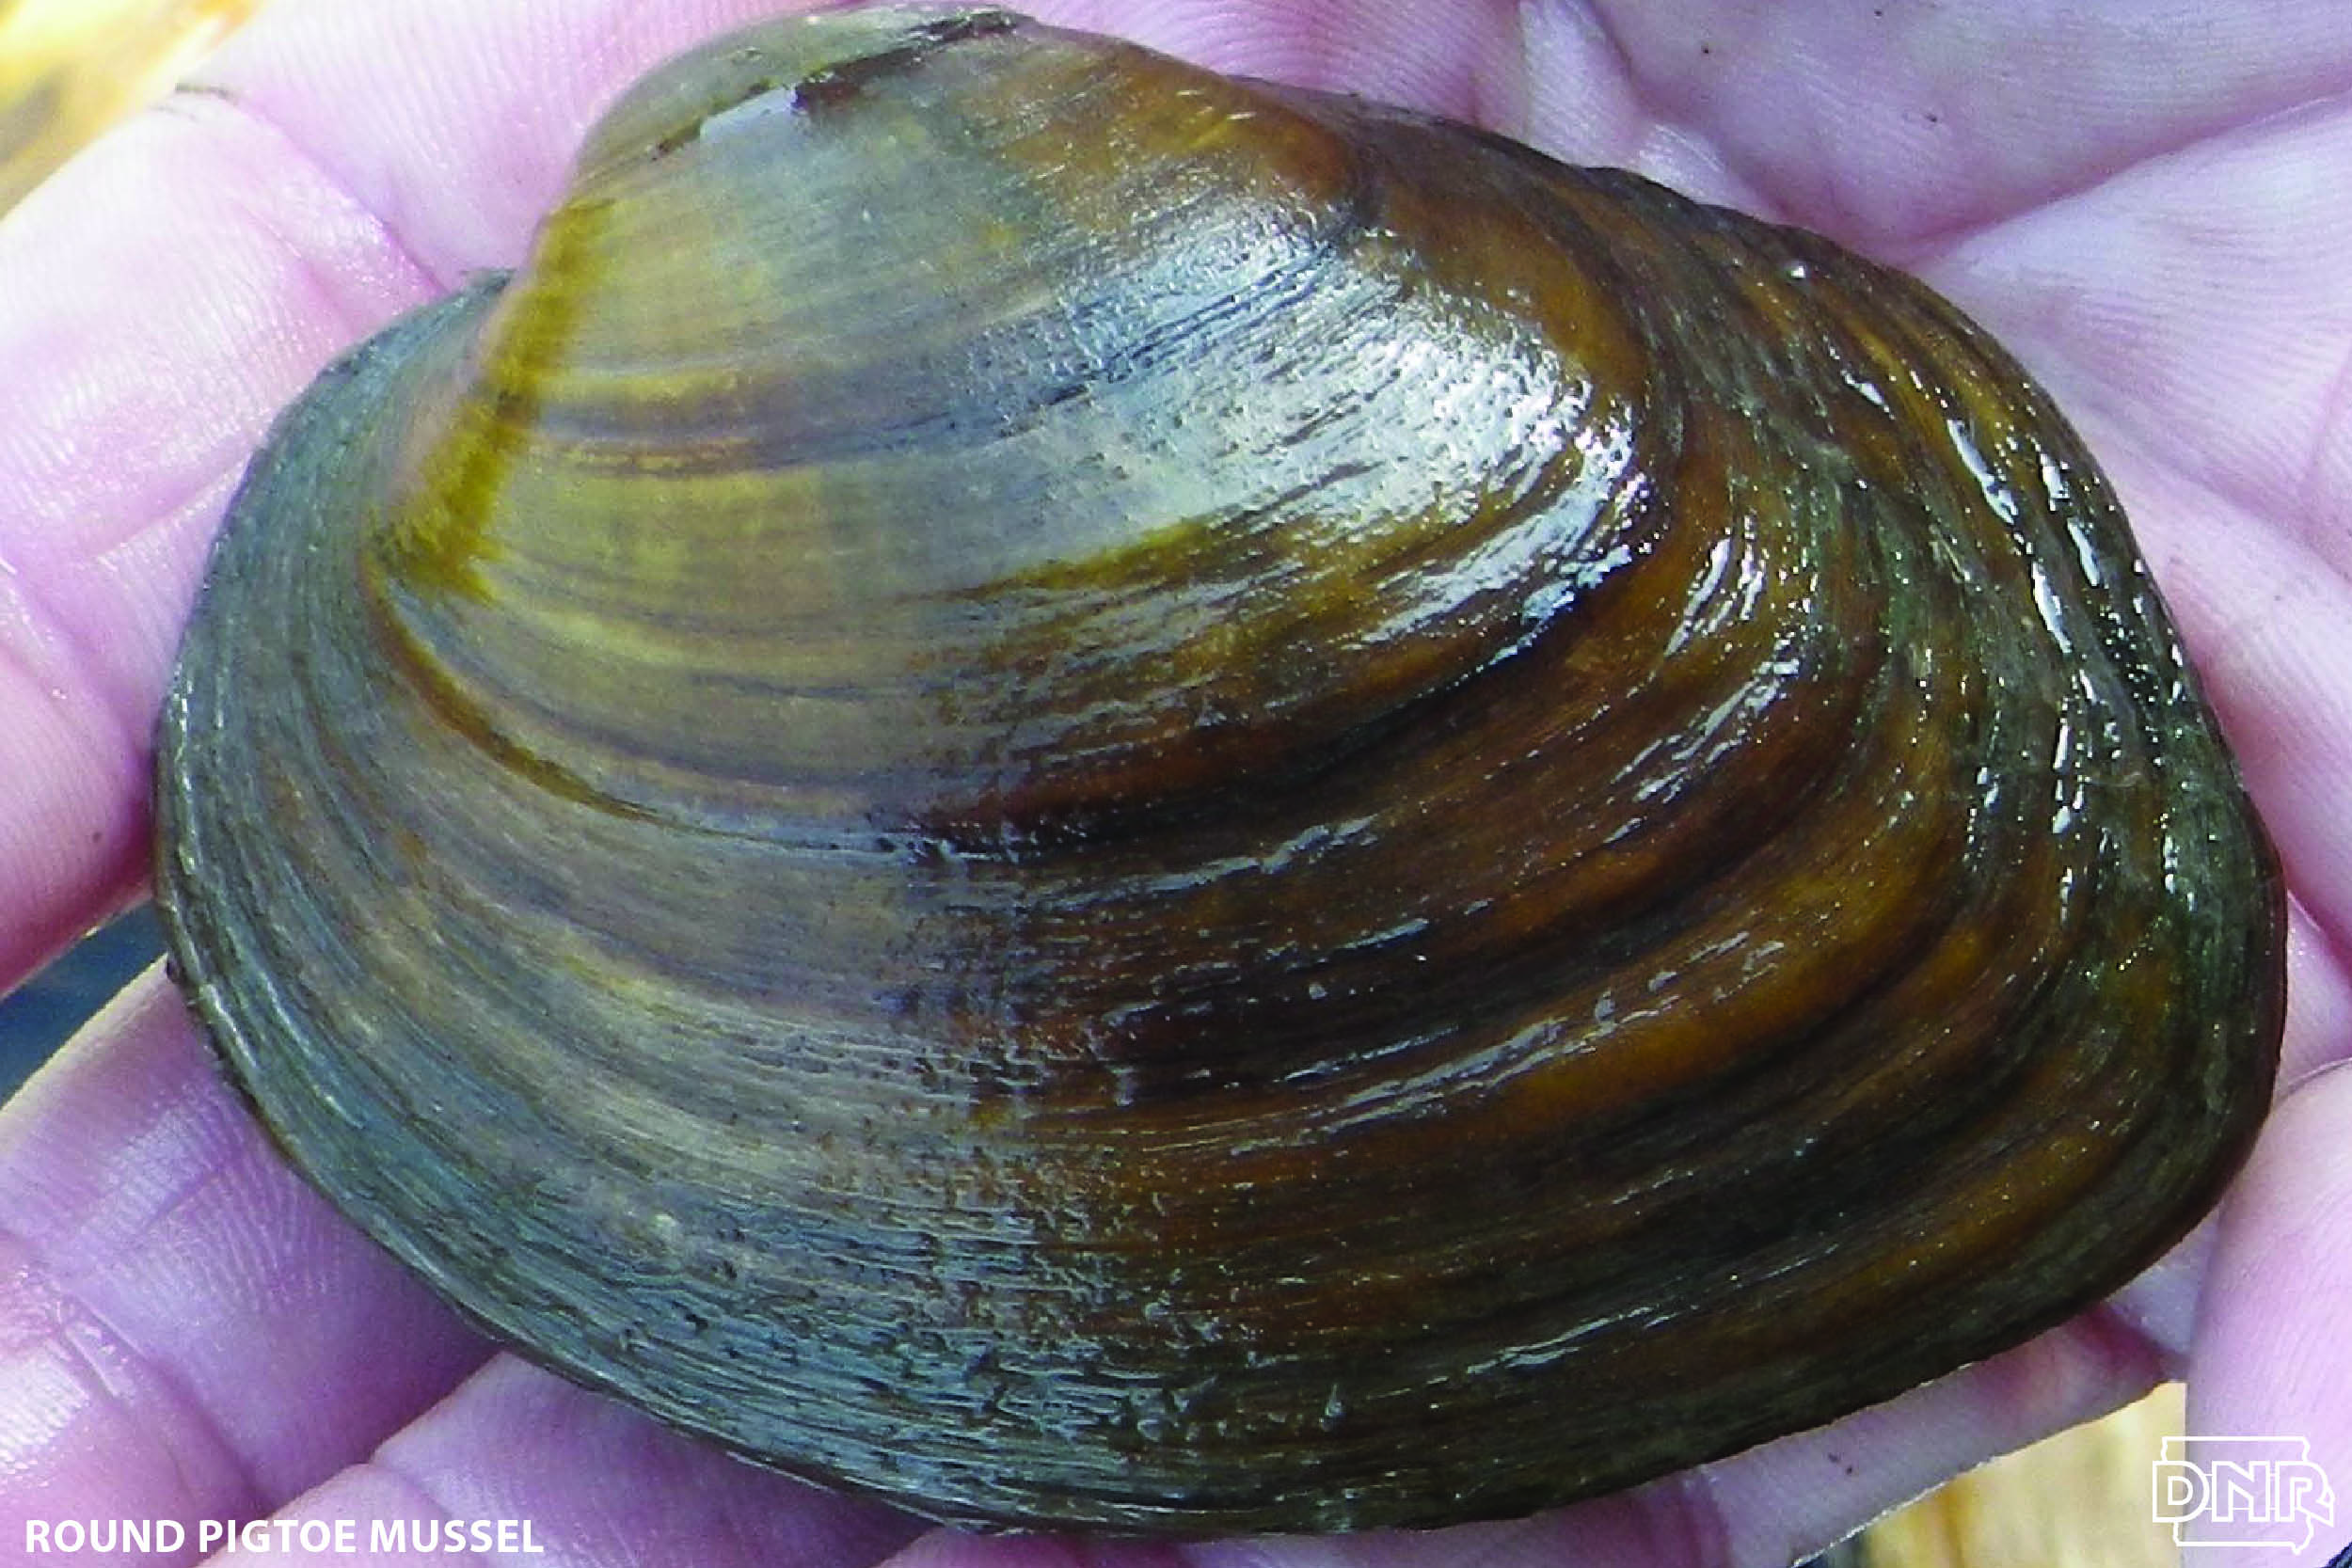 Cool things you should know about muckets and other mussels | Iowa DNR